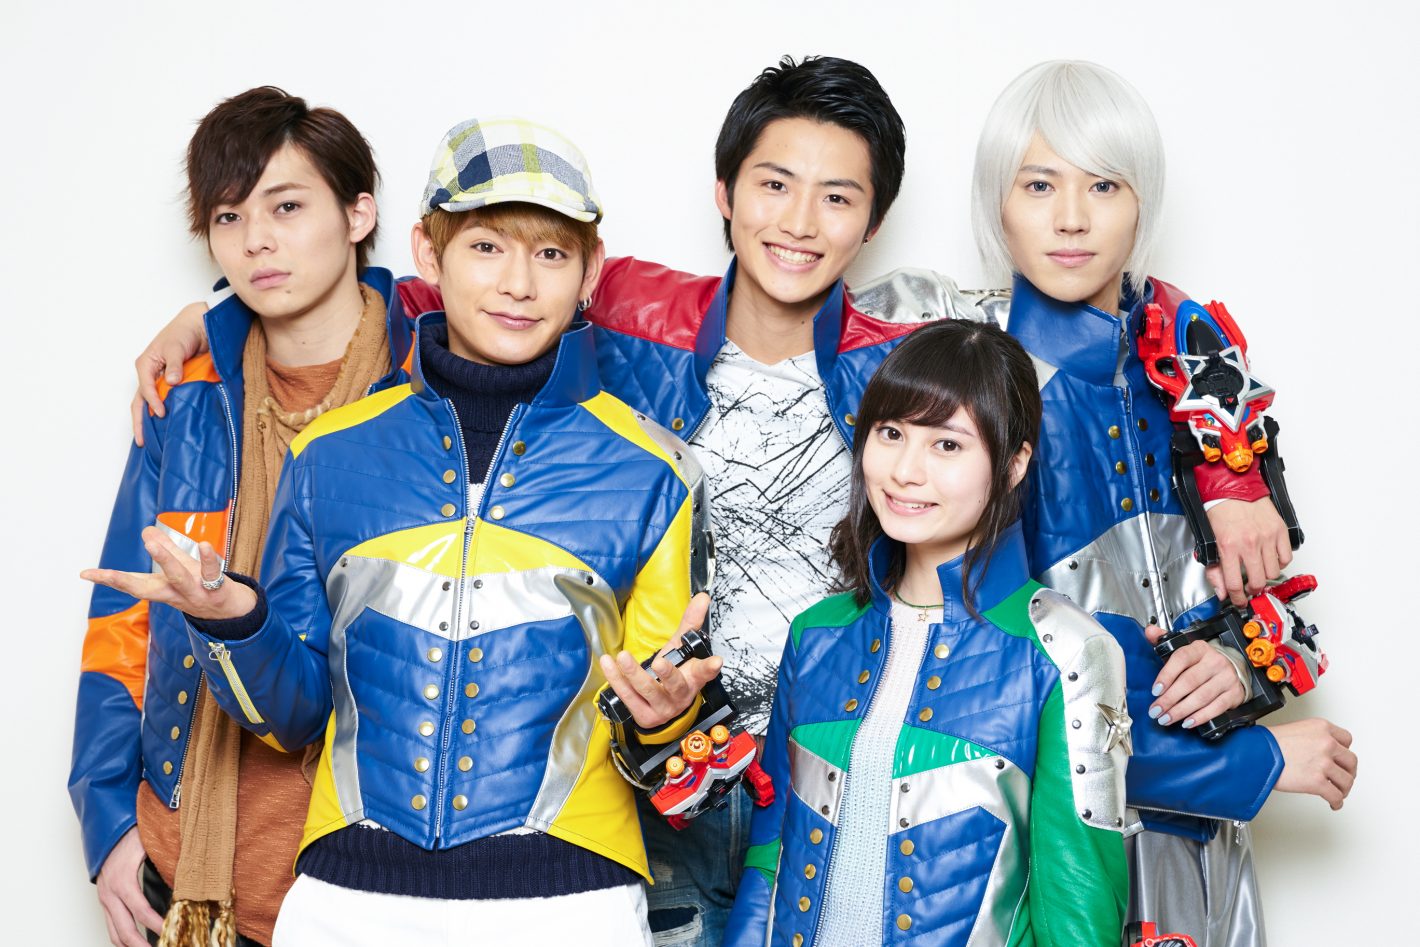 Kyuranger Cast Describes their Recent Obsessions - The Tokusatsu Network